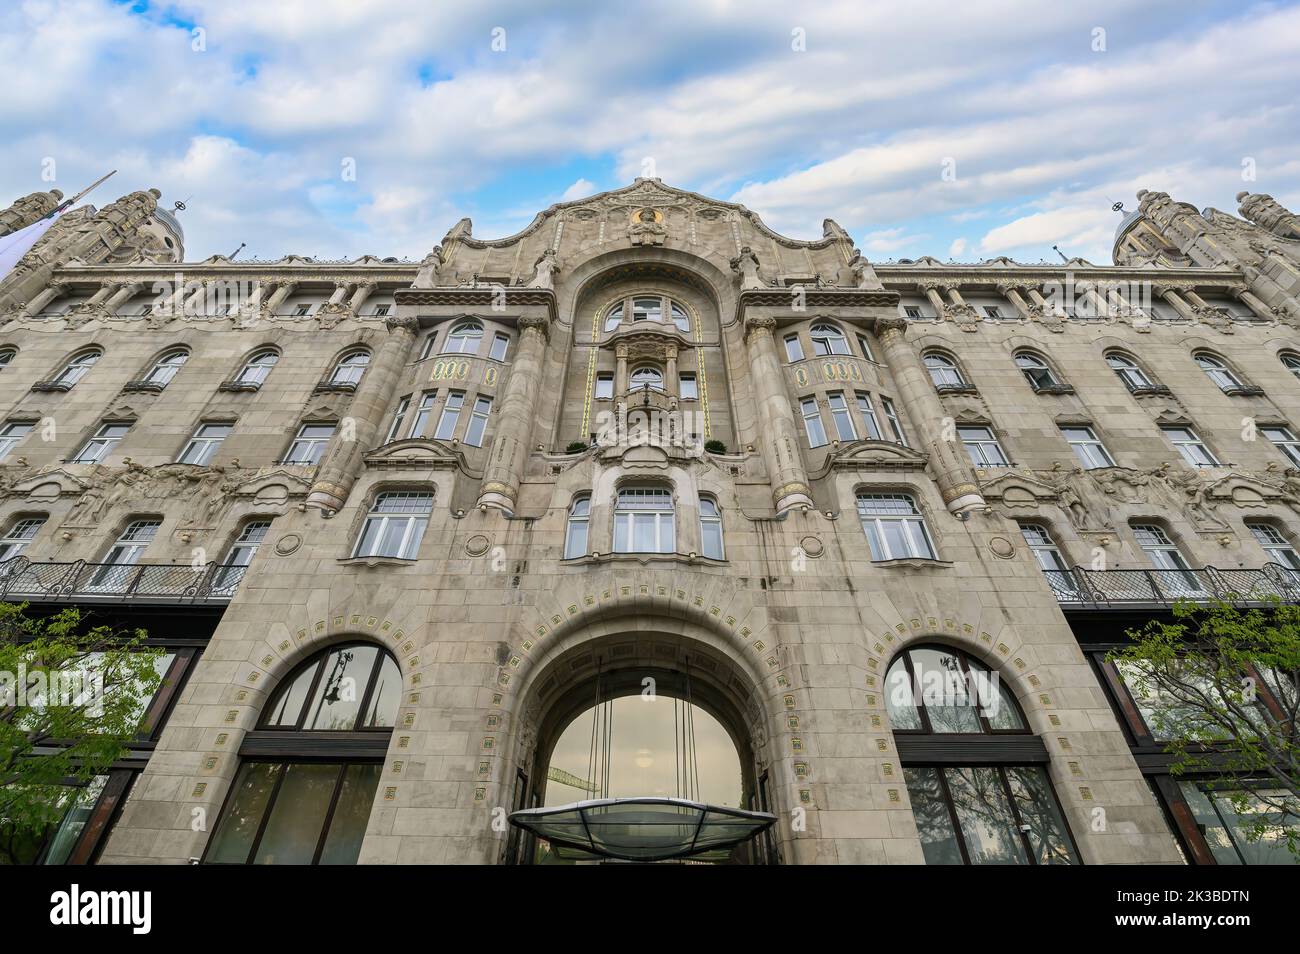 View of the Four Seasons Gresham Palace Hotel Budapest, a luxury hotel in a historic Art Nouveau building in downtown Budapest, Hungary Stock Photo